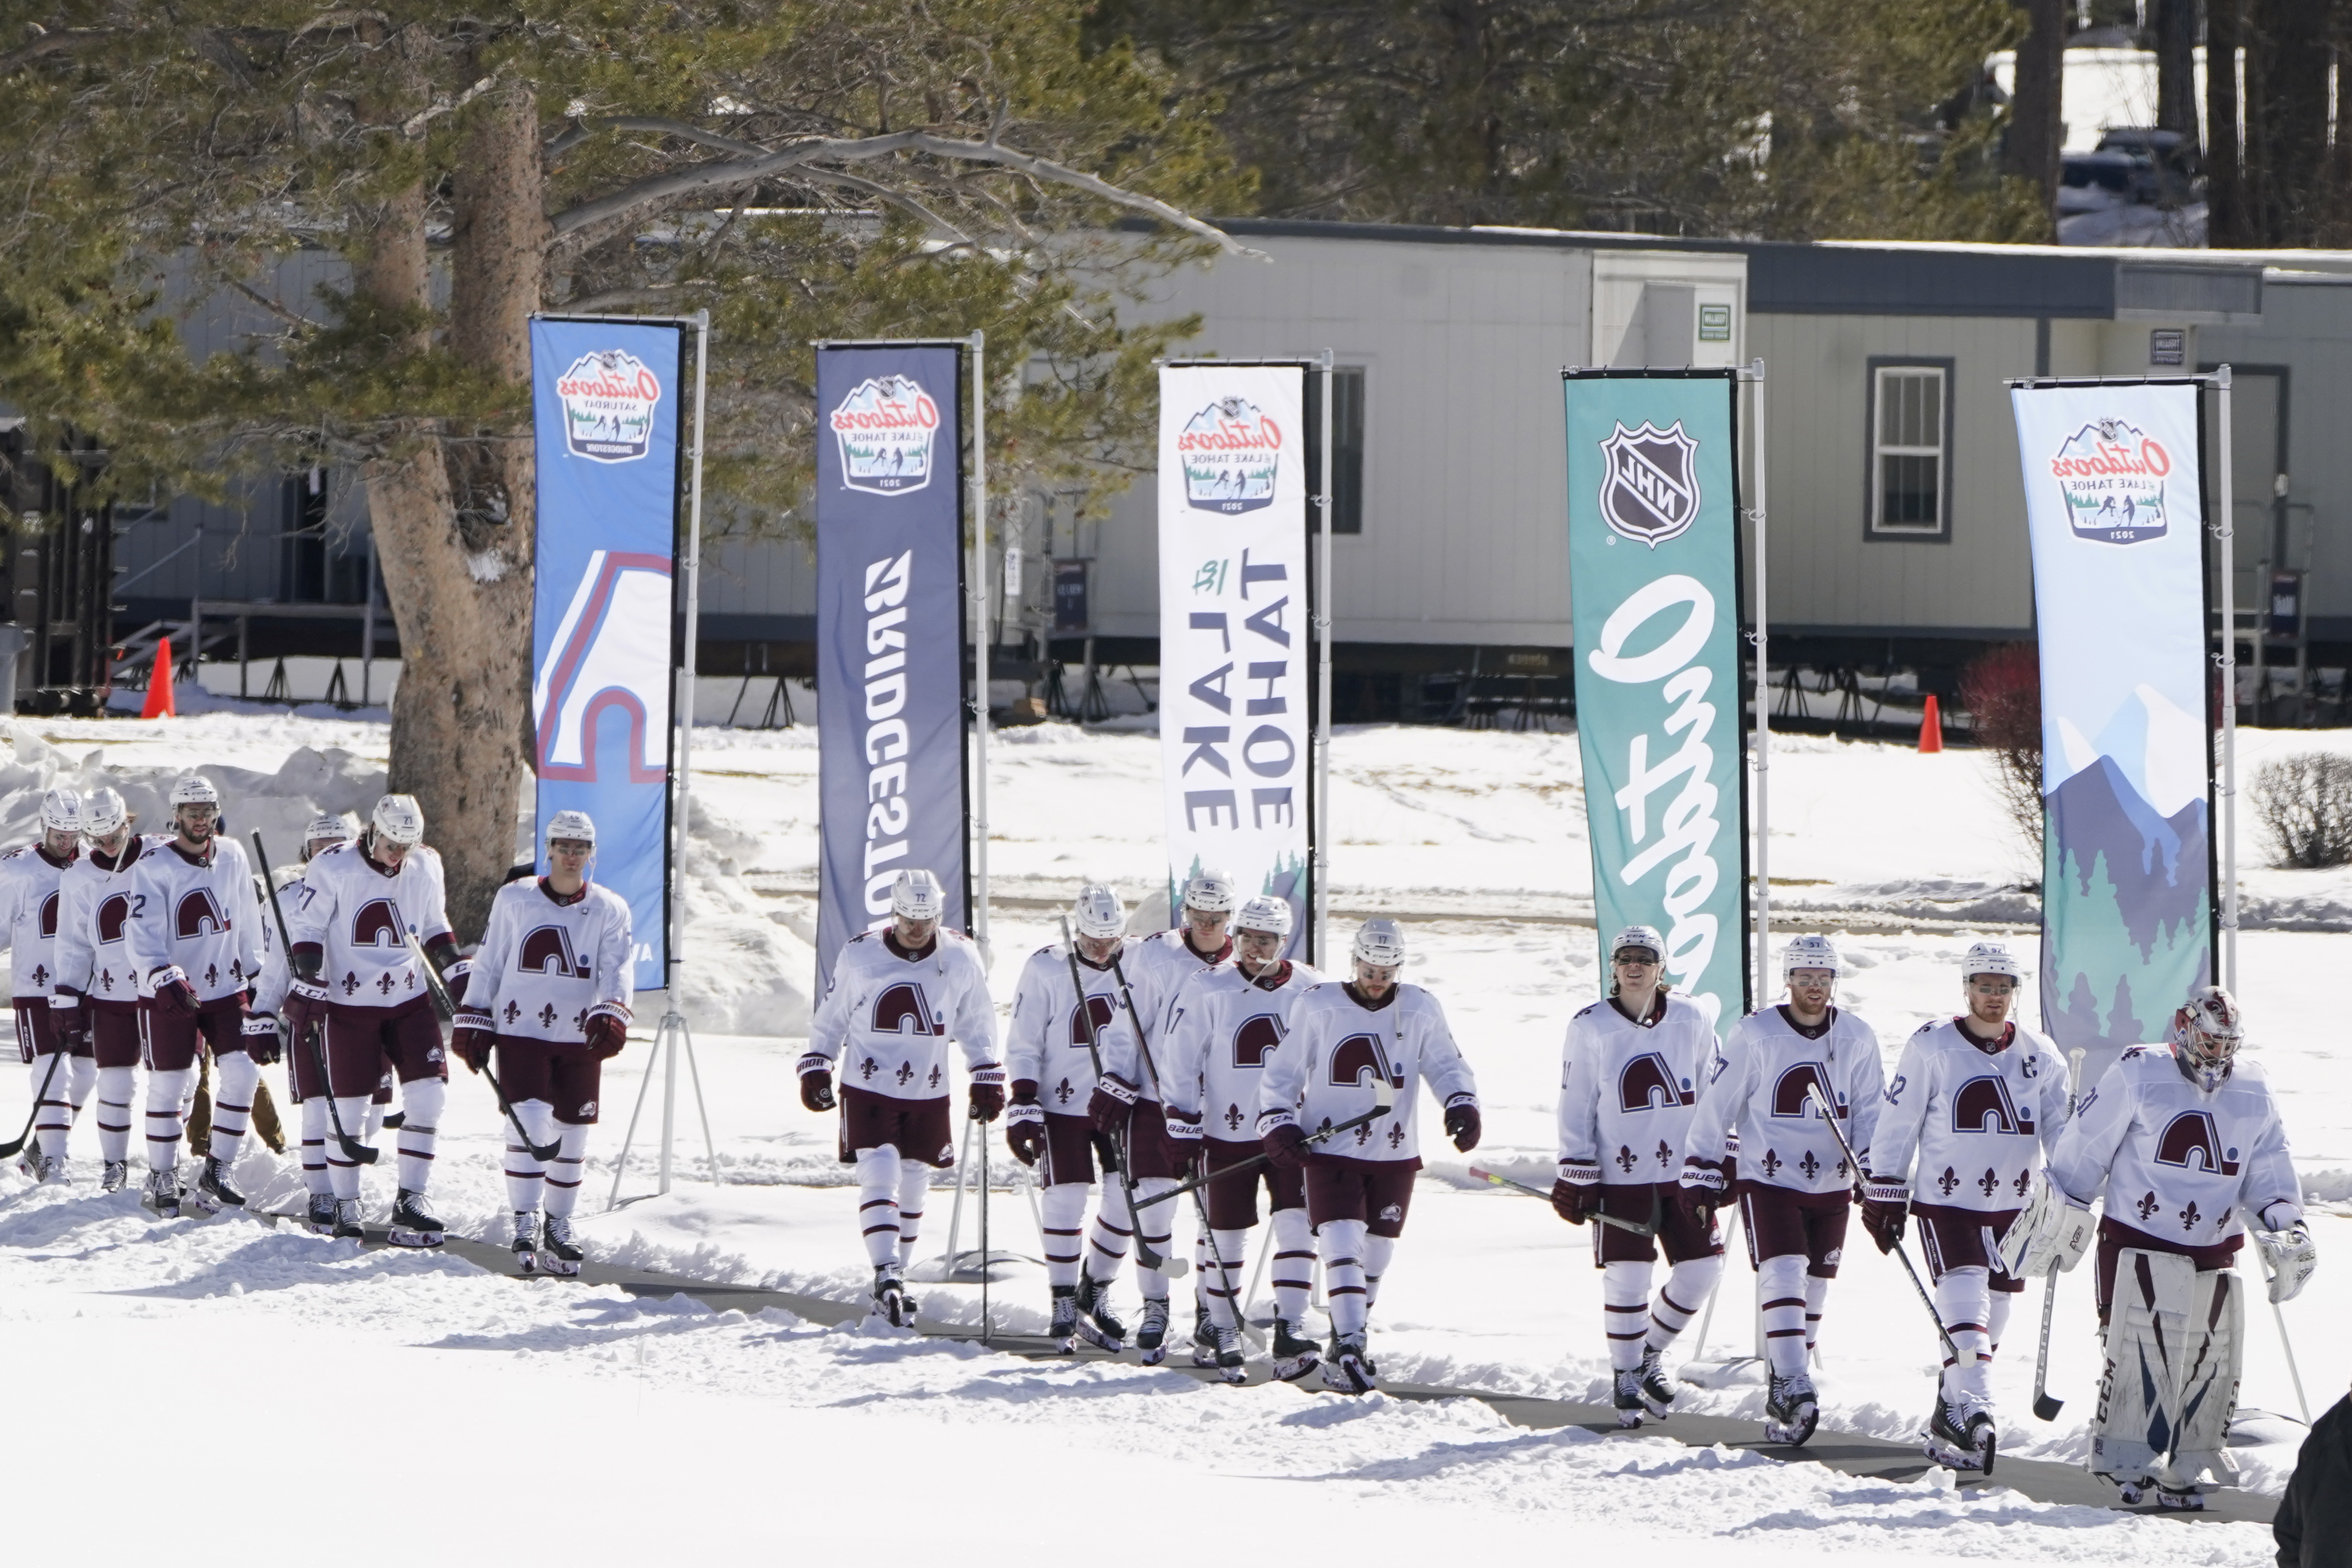 NHL play it pitch perfect with matchup selections for Lake Tahoe event